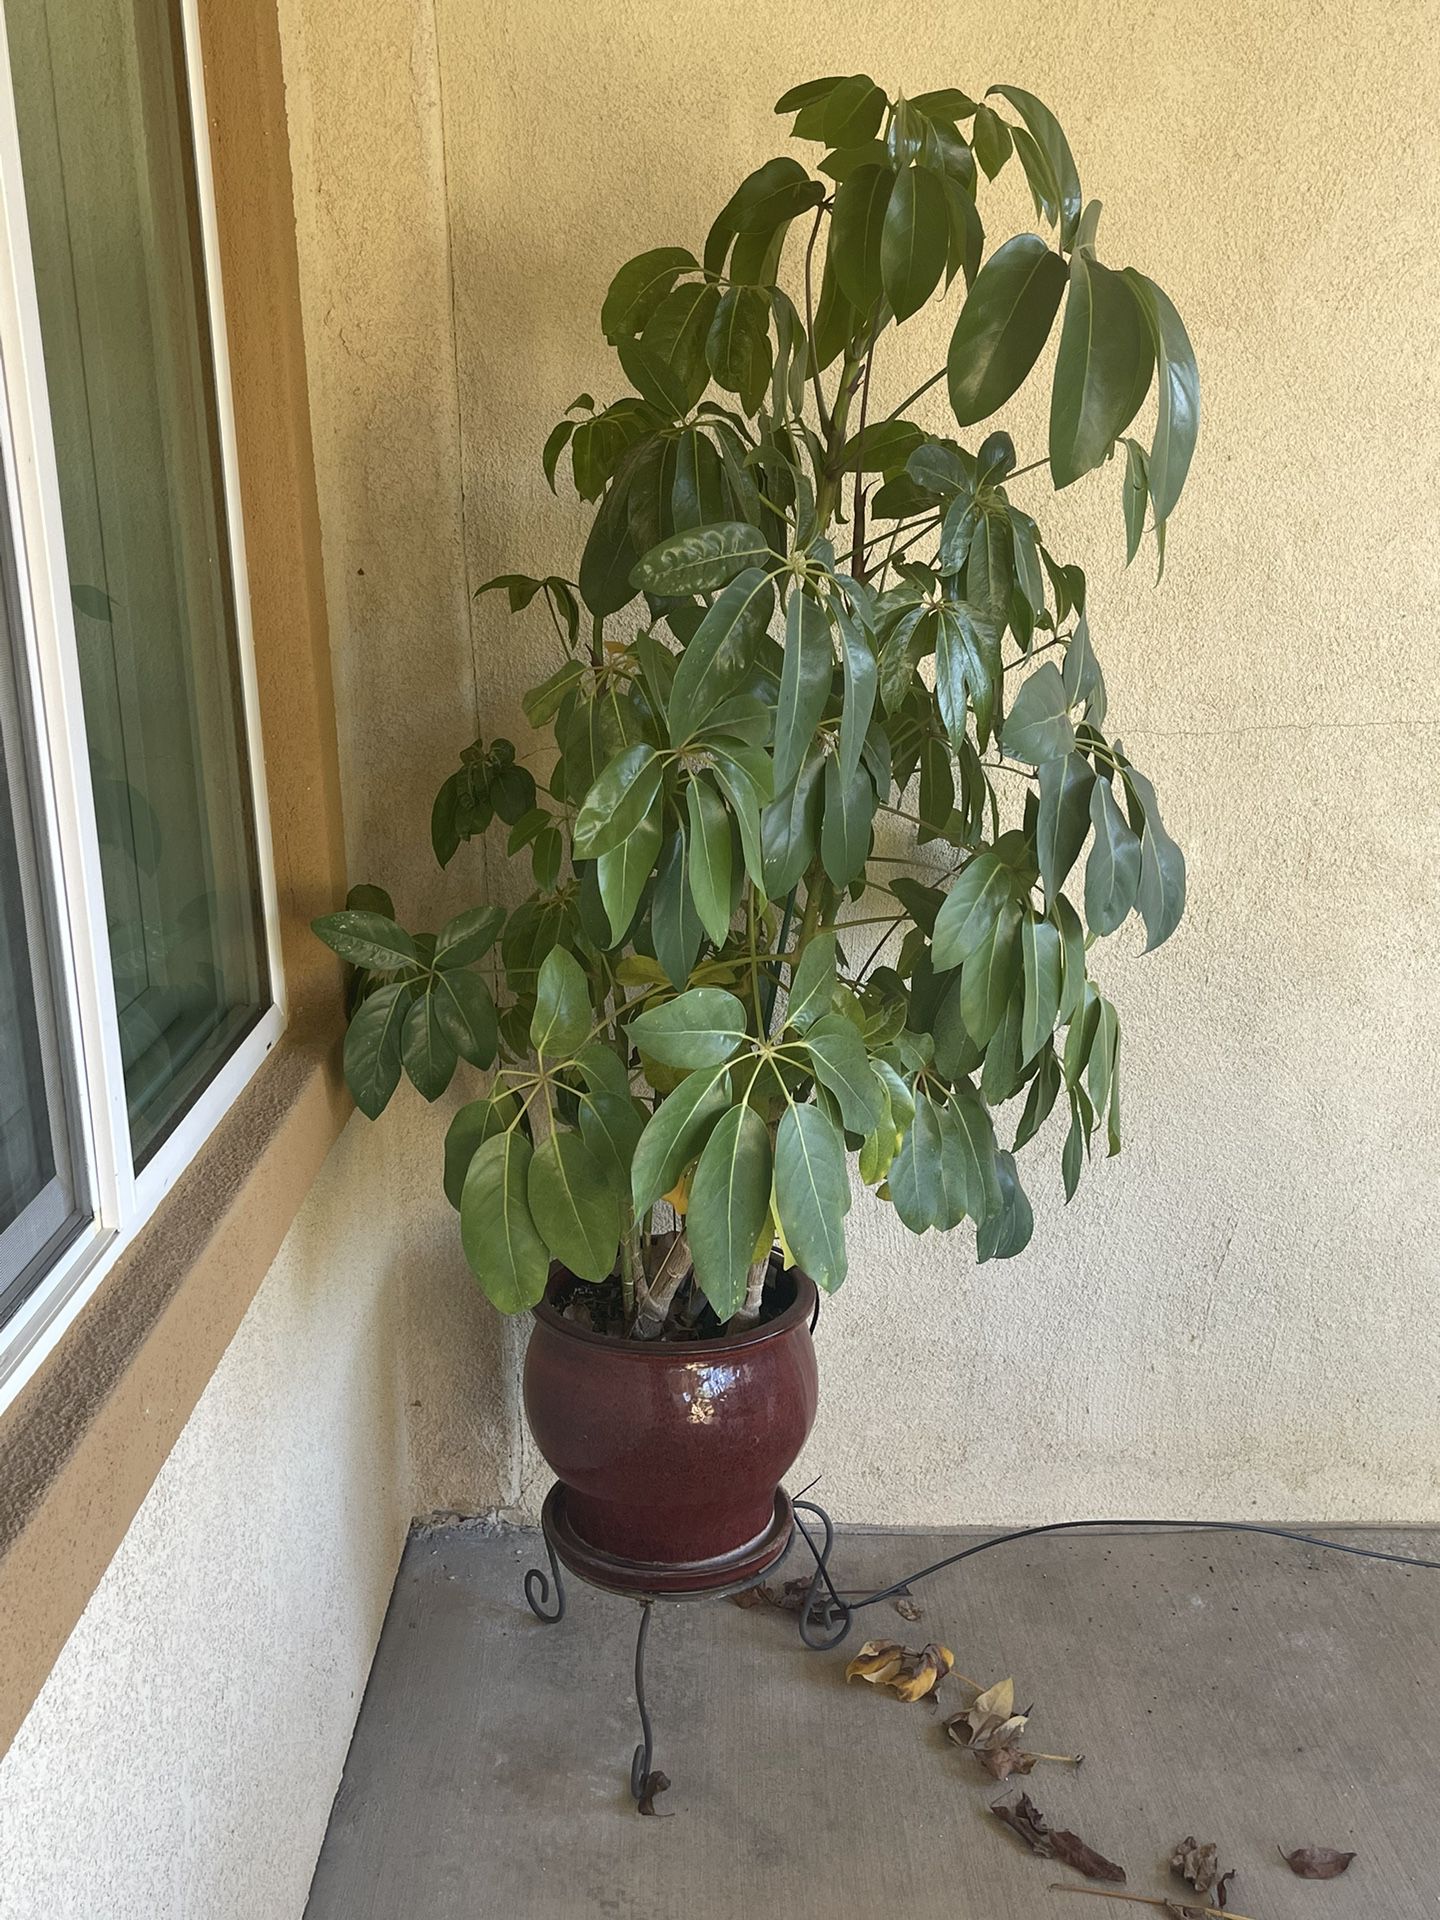 Live Potted Tree/Plant